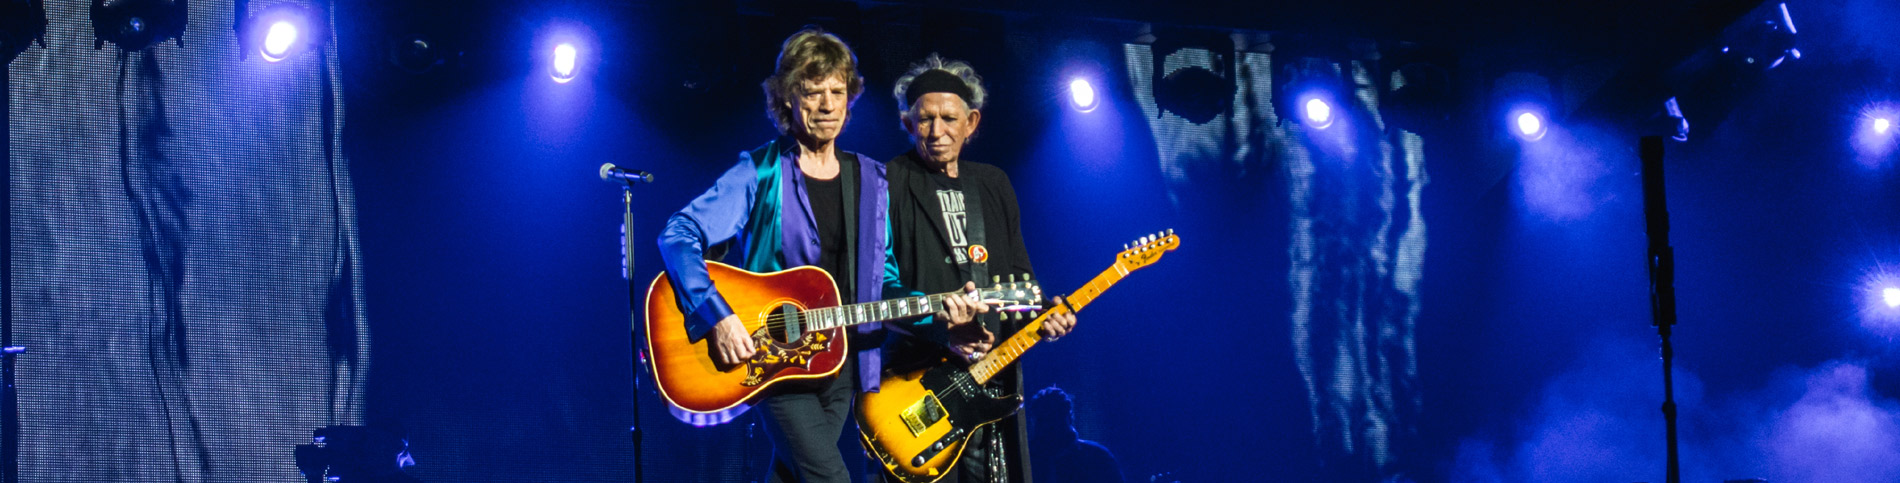 The Rolling Stones Live Concert Tickets